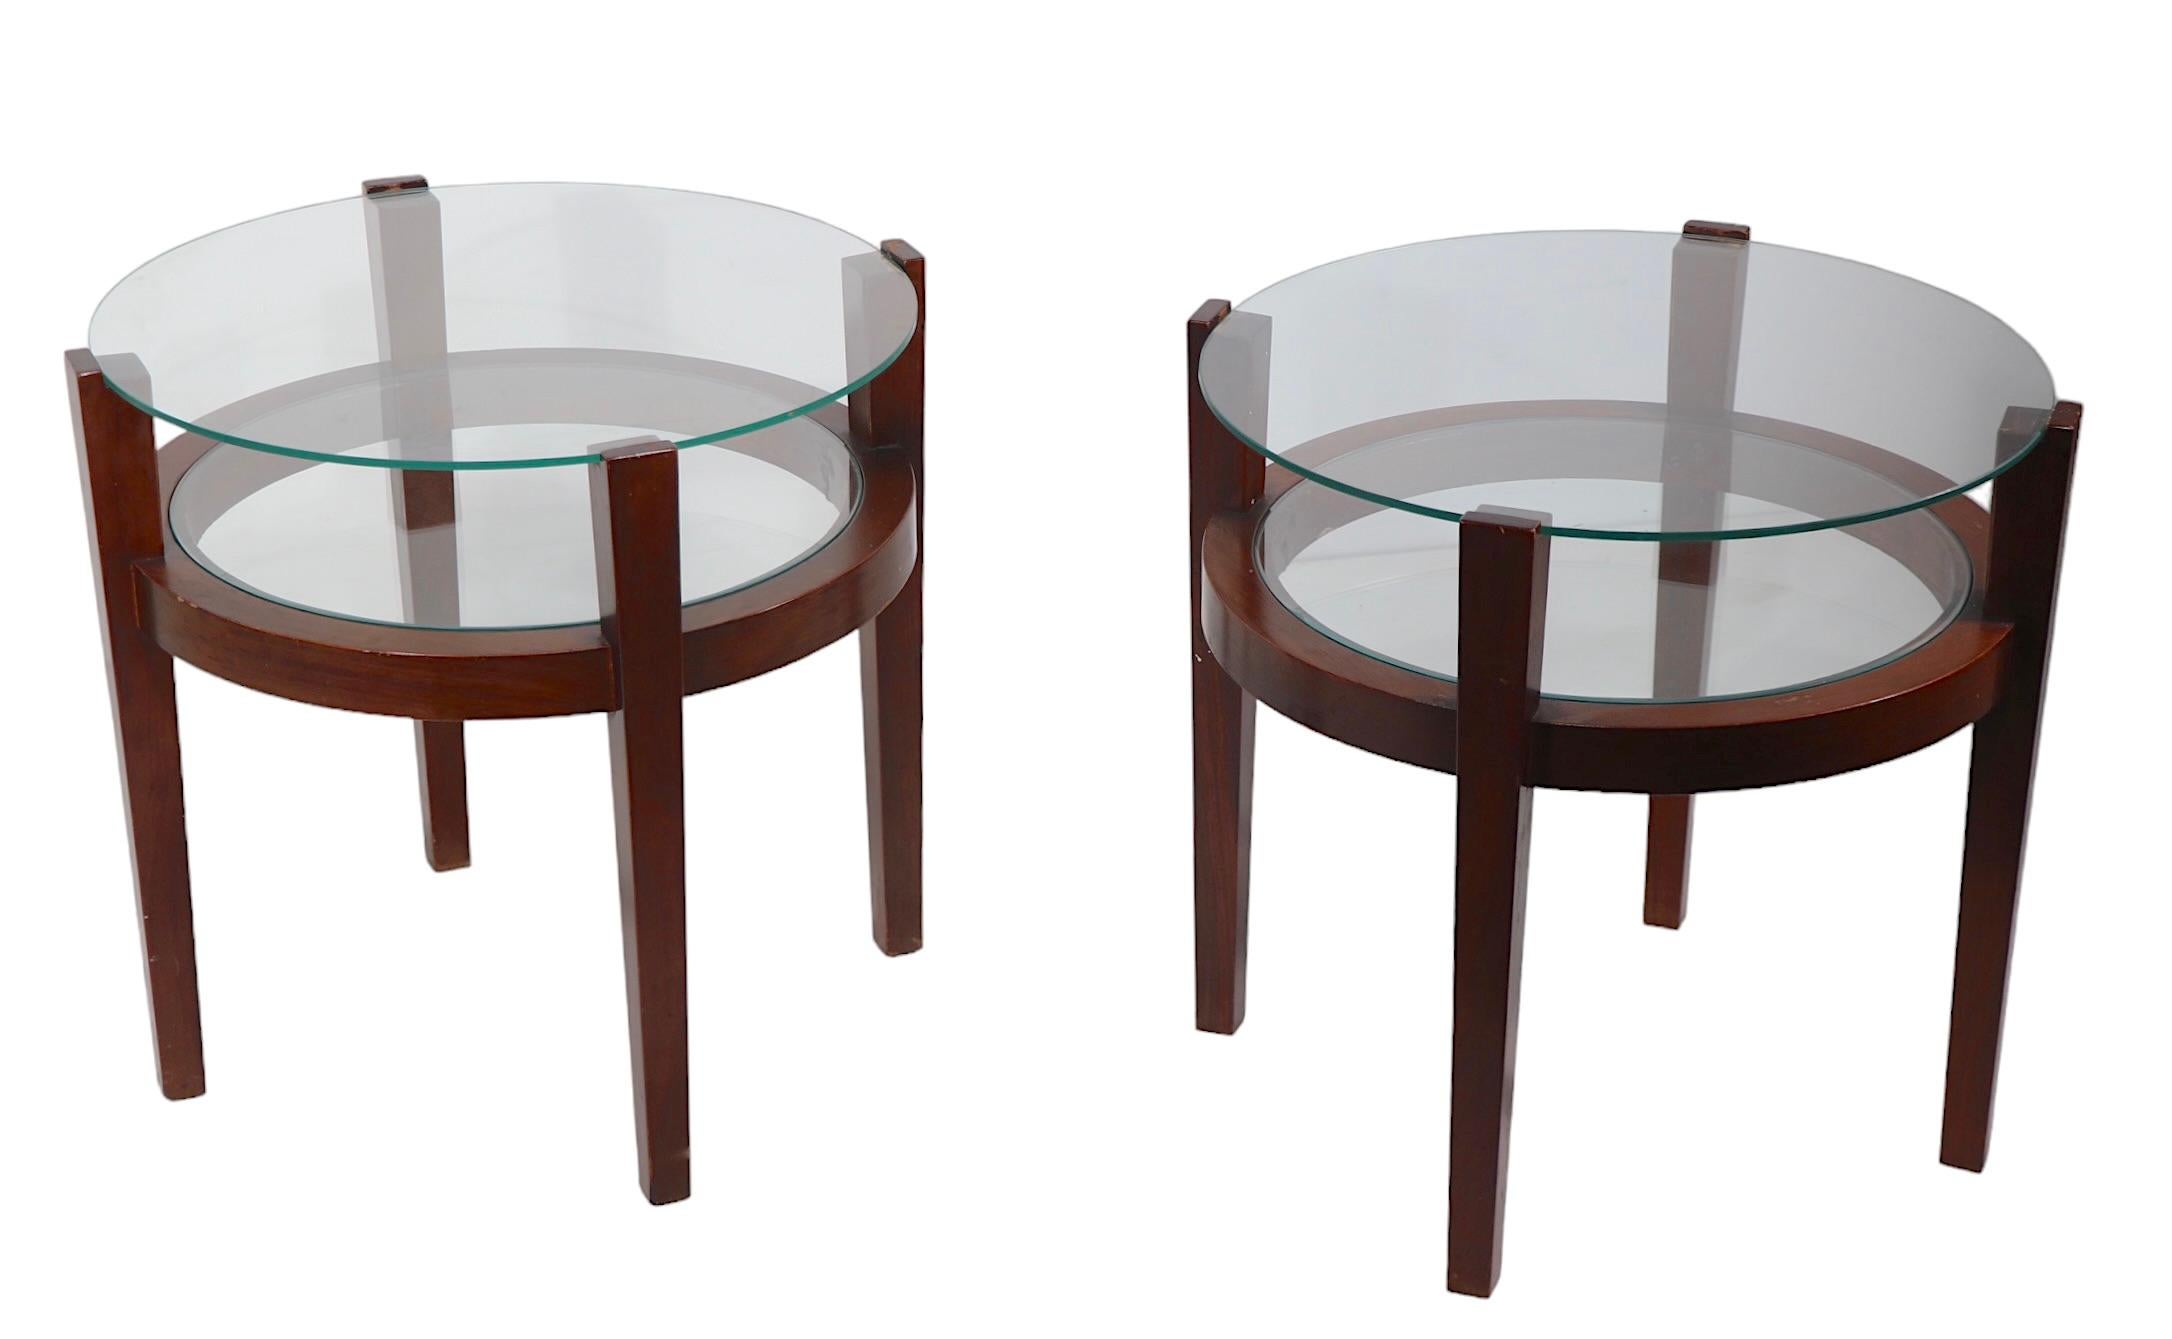 20th Century Pr.  Art Deco  Mid Century Two Tier Wood and Glass End Side Tables c 1940/1950's